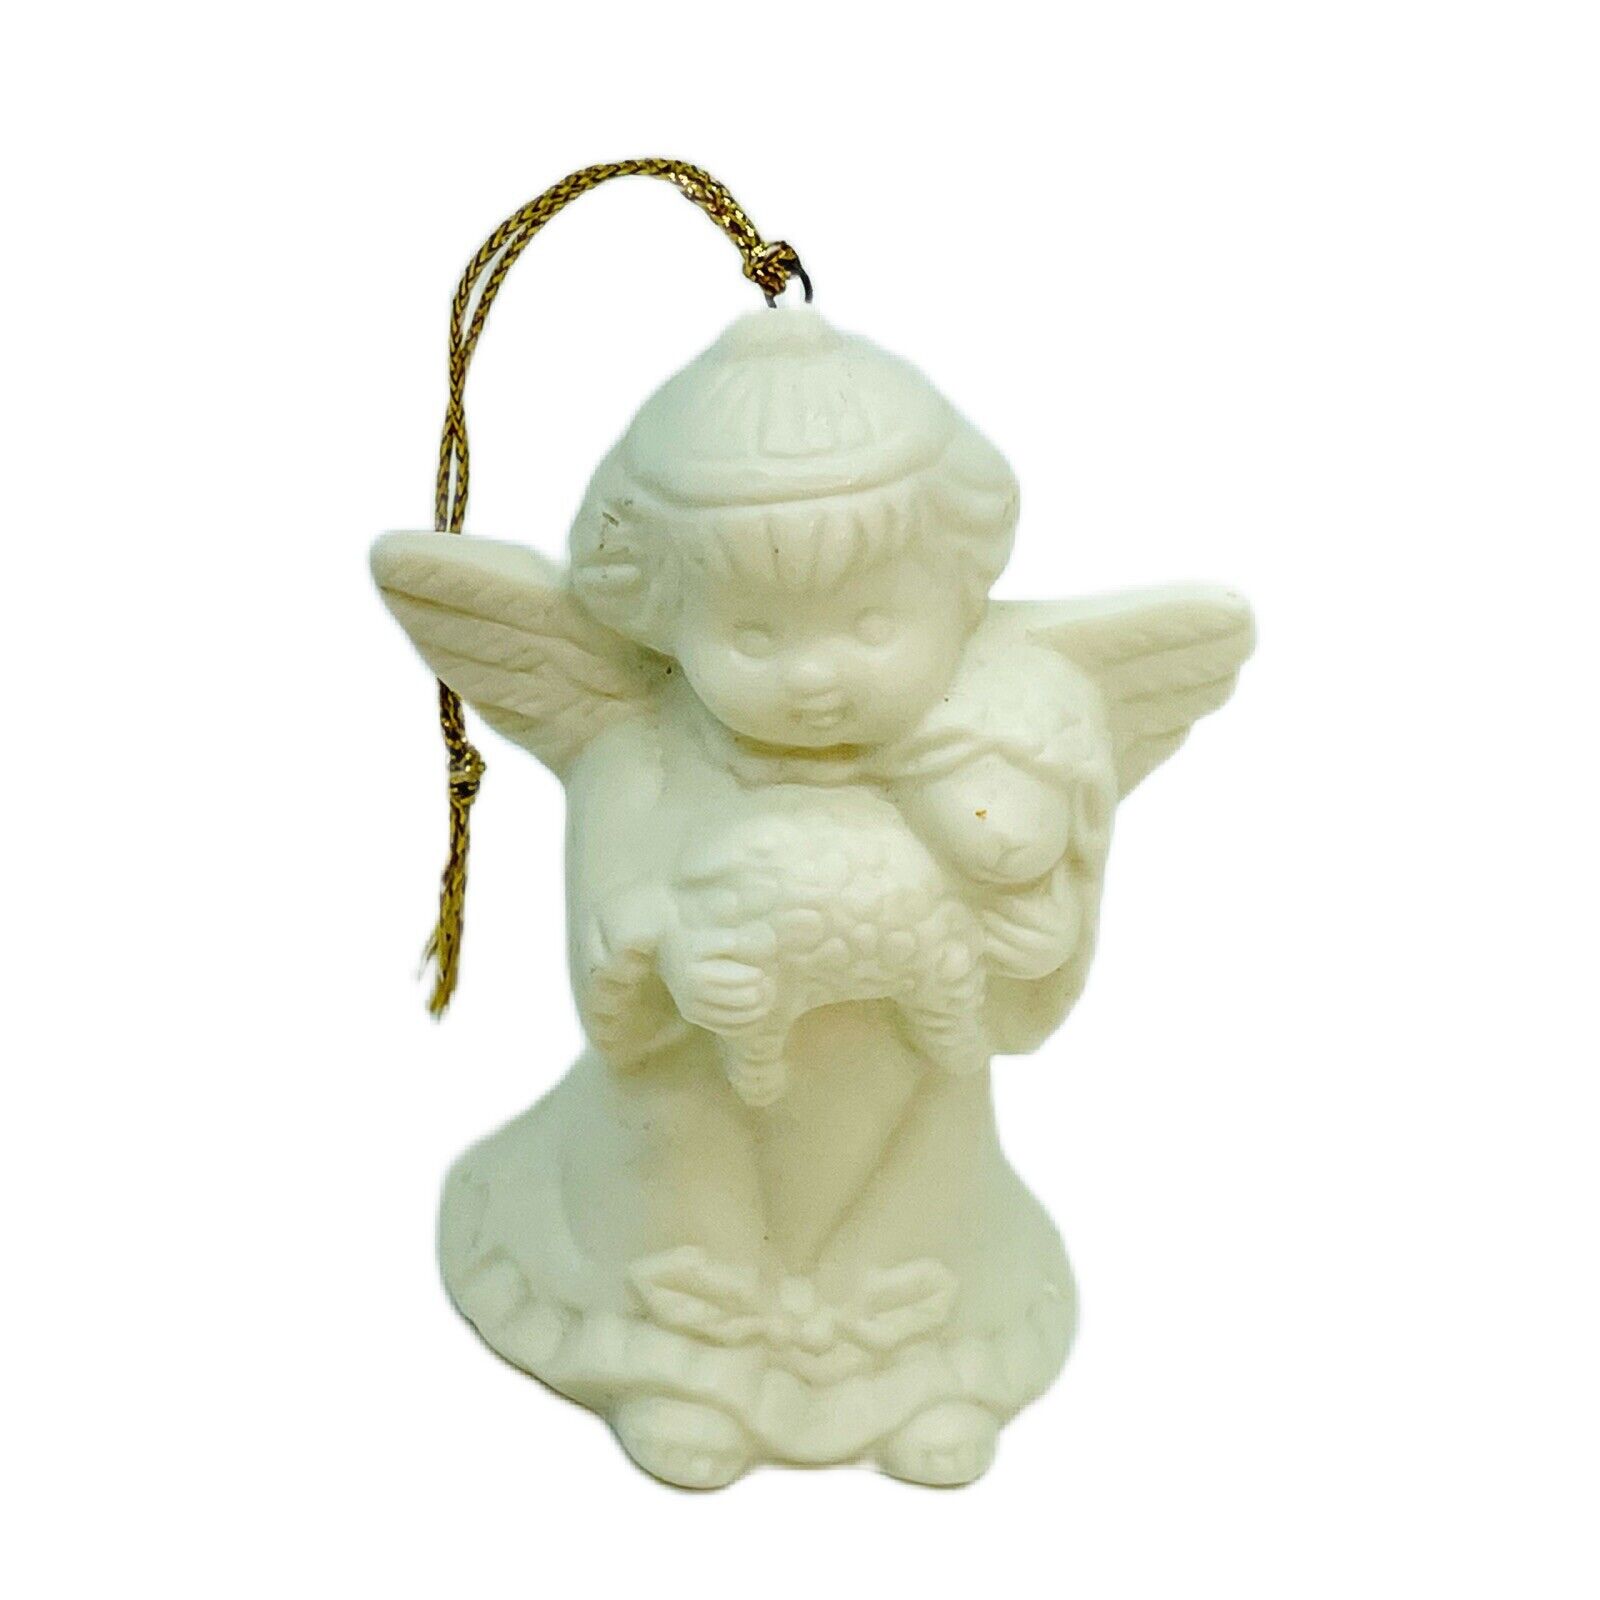 Vintage White Angel With Wings Holding Lamb Christmas Ornament Ceramic Taiwan